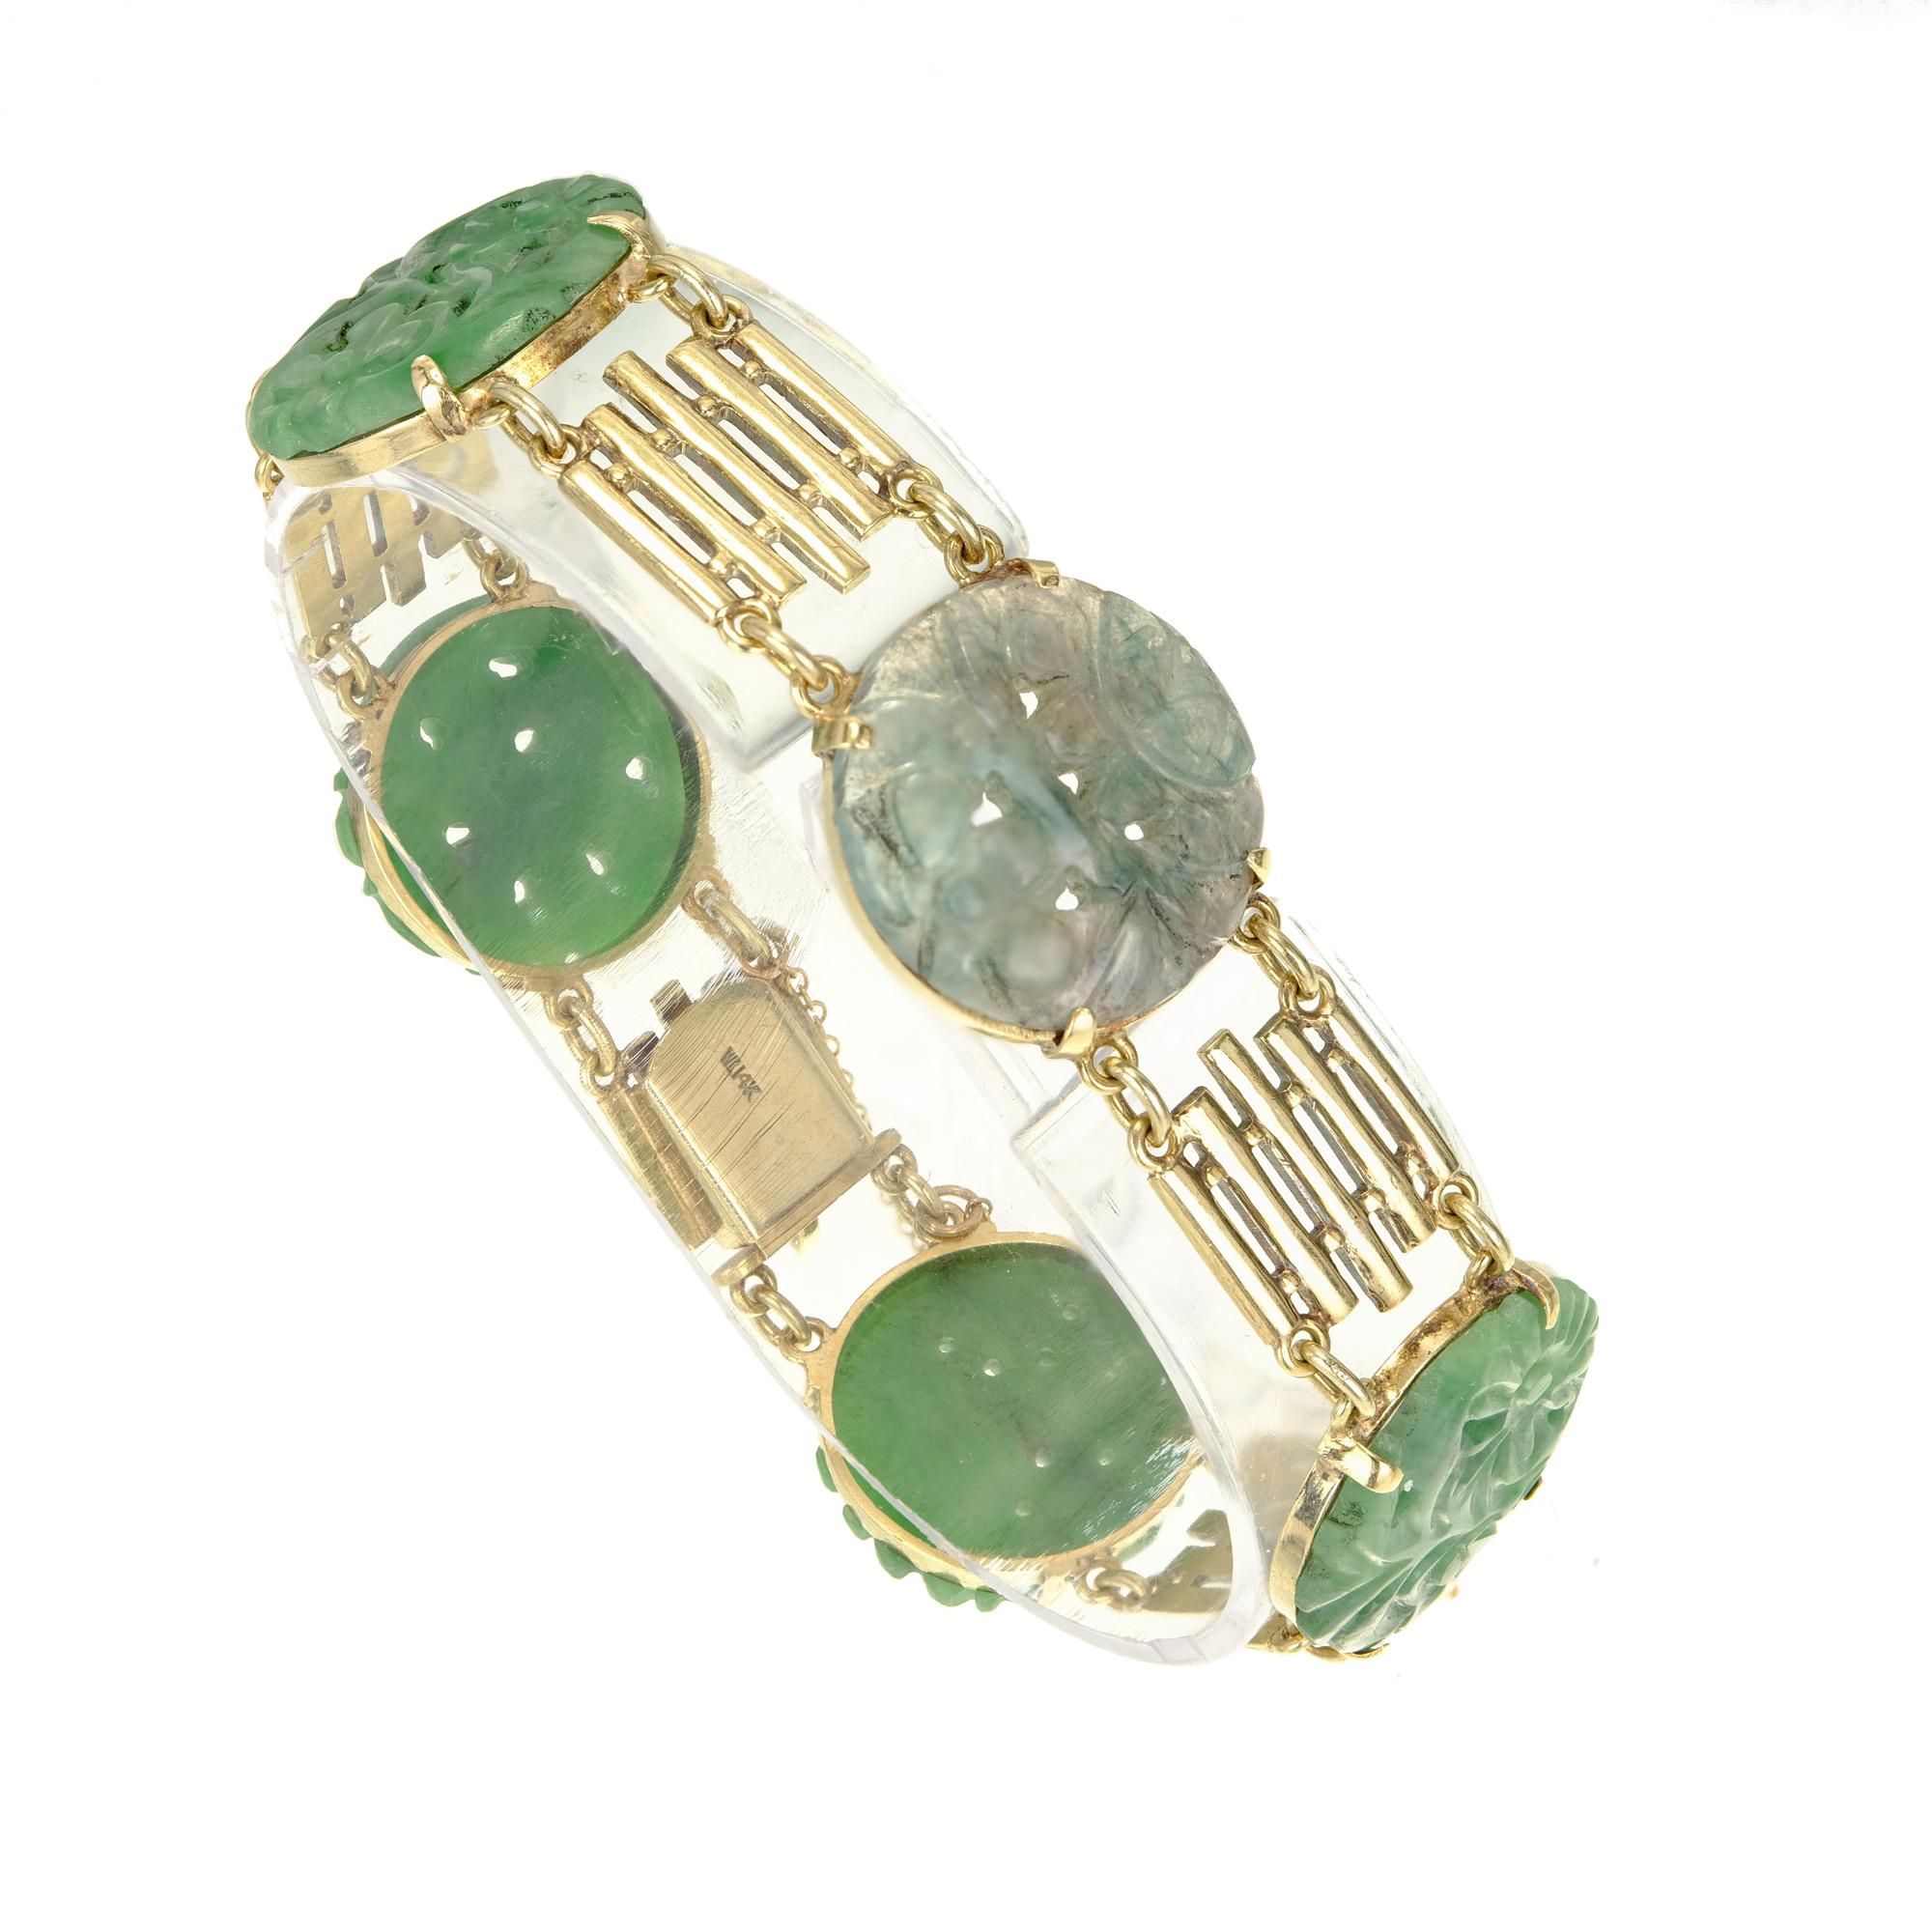 1940's Art Deco Jade bracelet in slightly green gold with certified untreated round Jadeite Jade.

5 green 18.7mm x 2.0mm round carved Jadeite Jade, natural, no enhancements and no treatments, GIA certificate #2205069196
Length: 7 inches
14k green